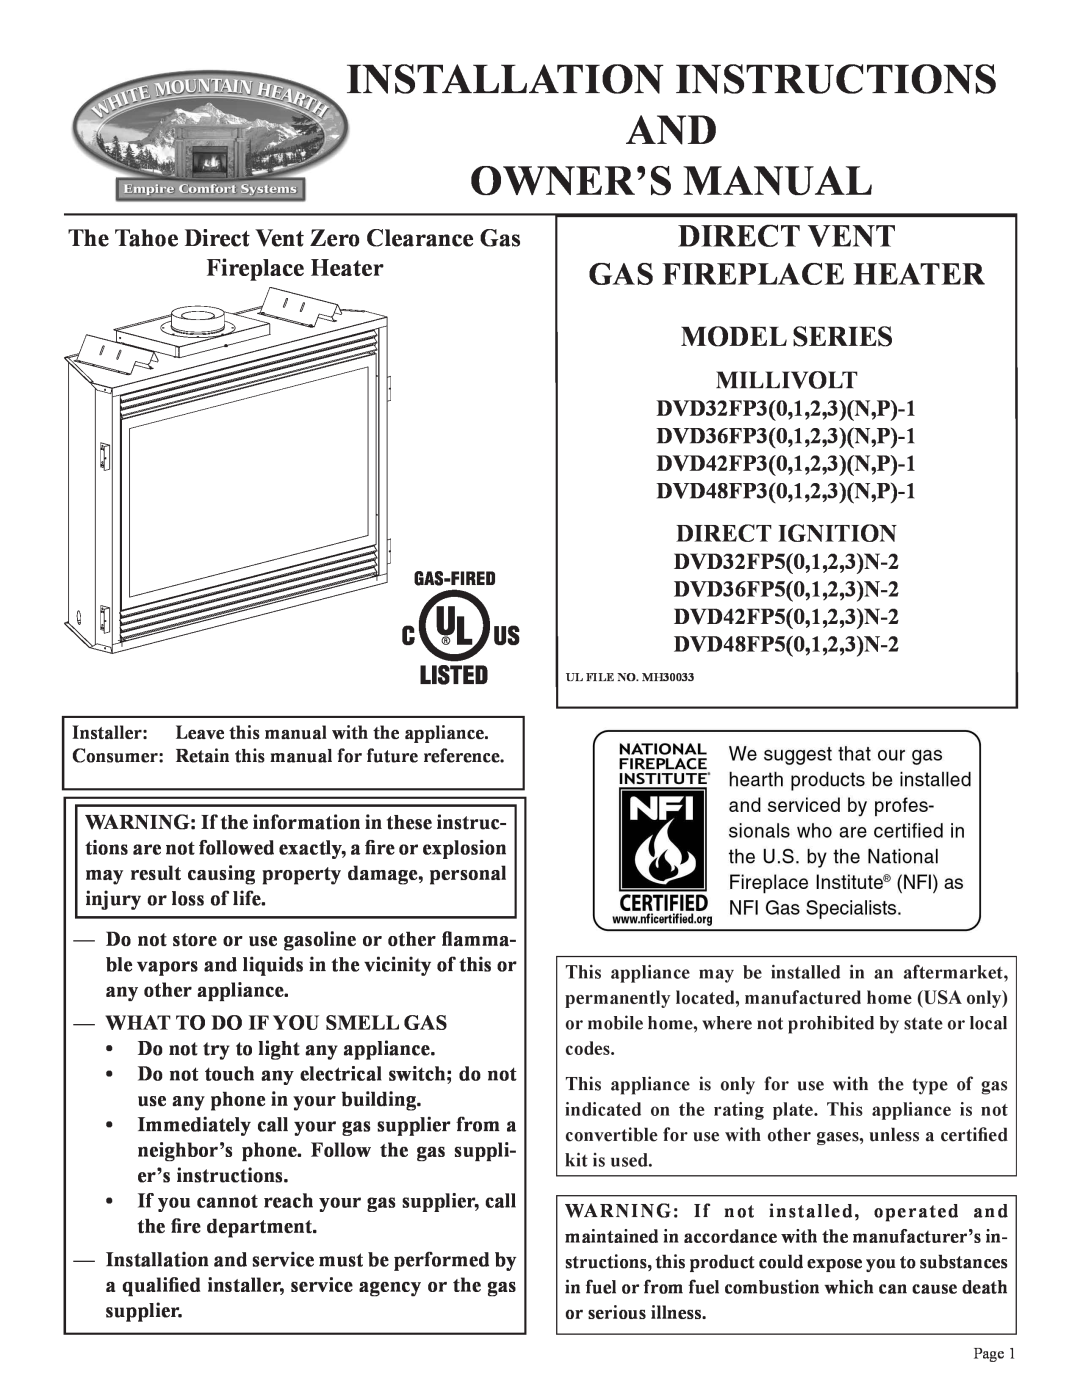 Empire Comfort Systems 2 installation instructions The Tahoe Direct Vent Zero Clearance Gas, Fireplace Heater, Millivolt 